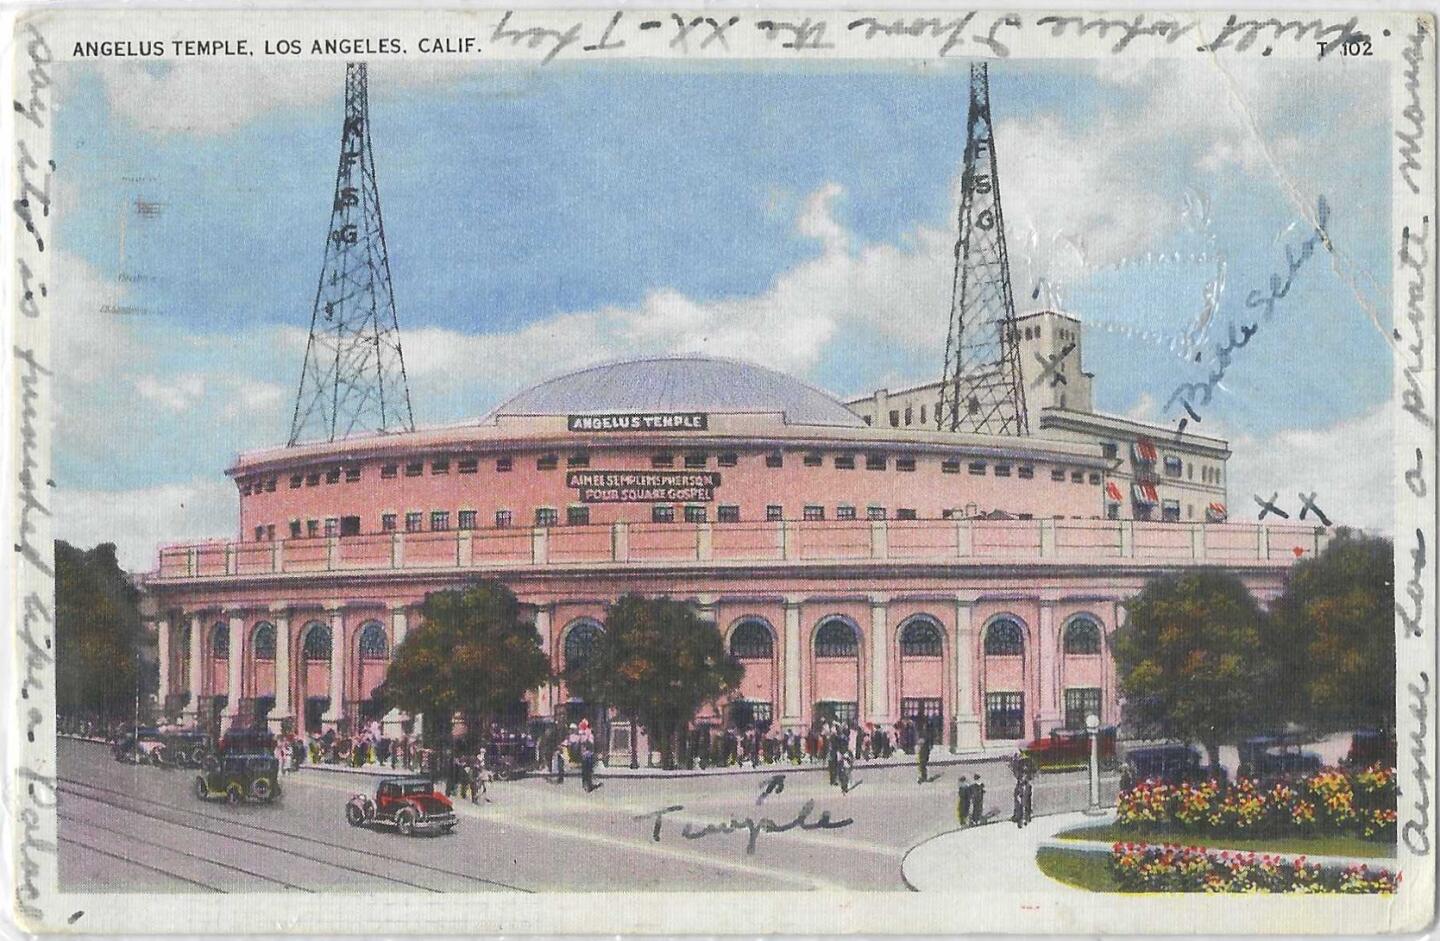 Vintage postcard shows Angelus Temple with radio towers on the roof